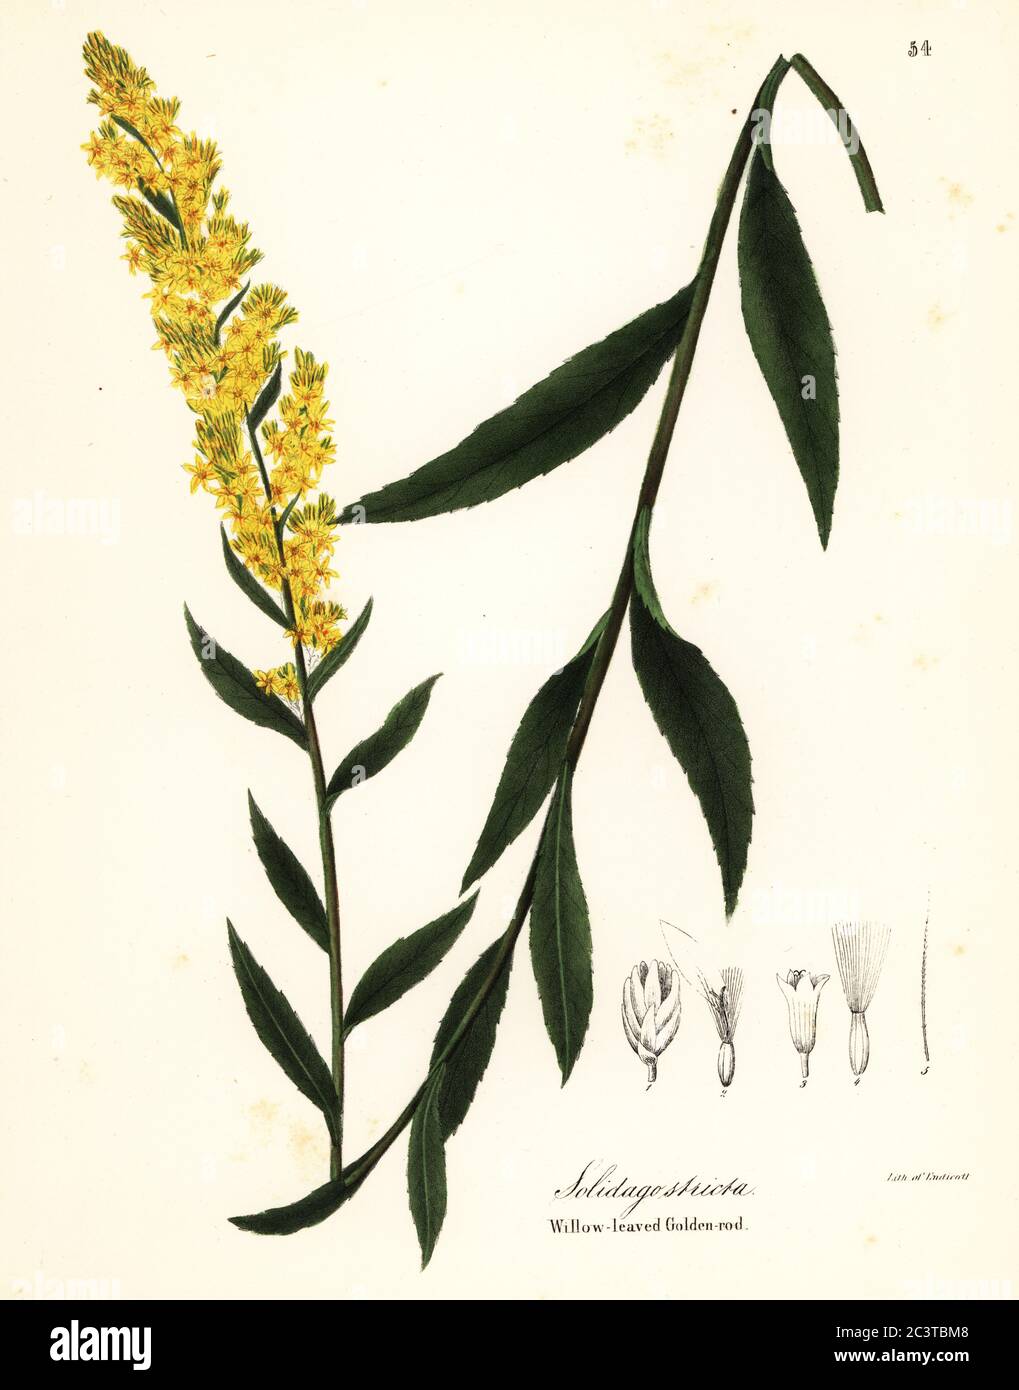 Wand goldenrod, willowleaf goldenrod or willow-leaved golden-rod, Solidago stricta. Handcoloured lithograph by Endicott after a botanical illustration from John Torrey’s A Flora of the State of New York, Carroll and Cook, Albany, 1843. The plates drawn by John Torrey, Agnes Mitchell, Elizabeth Paoley and Swinton. John Torrey was an American botanist, chemist and physician 1796-1873. Stock Photo